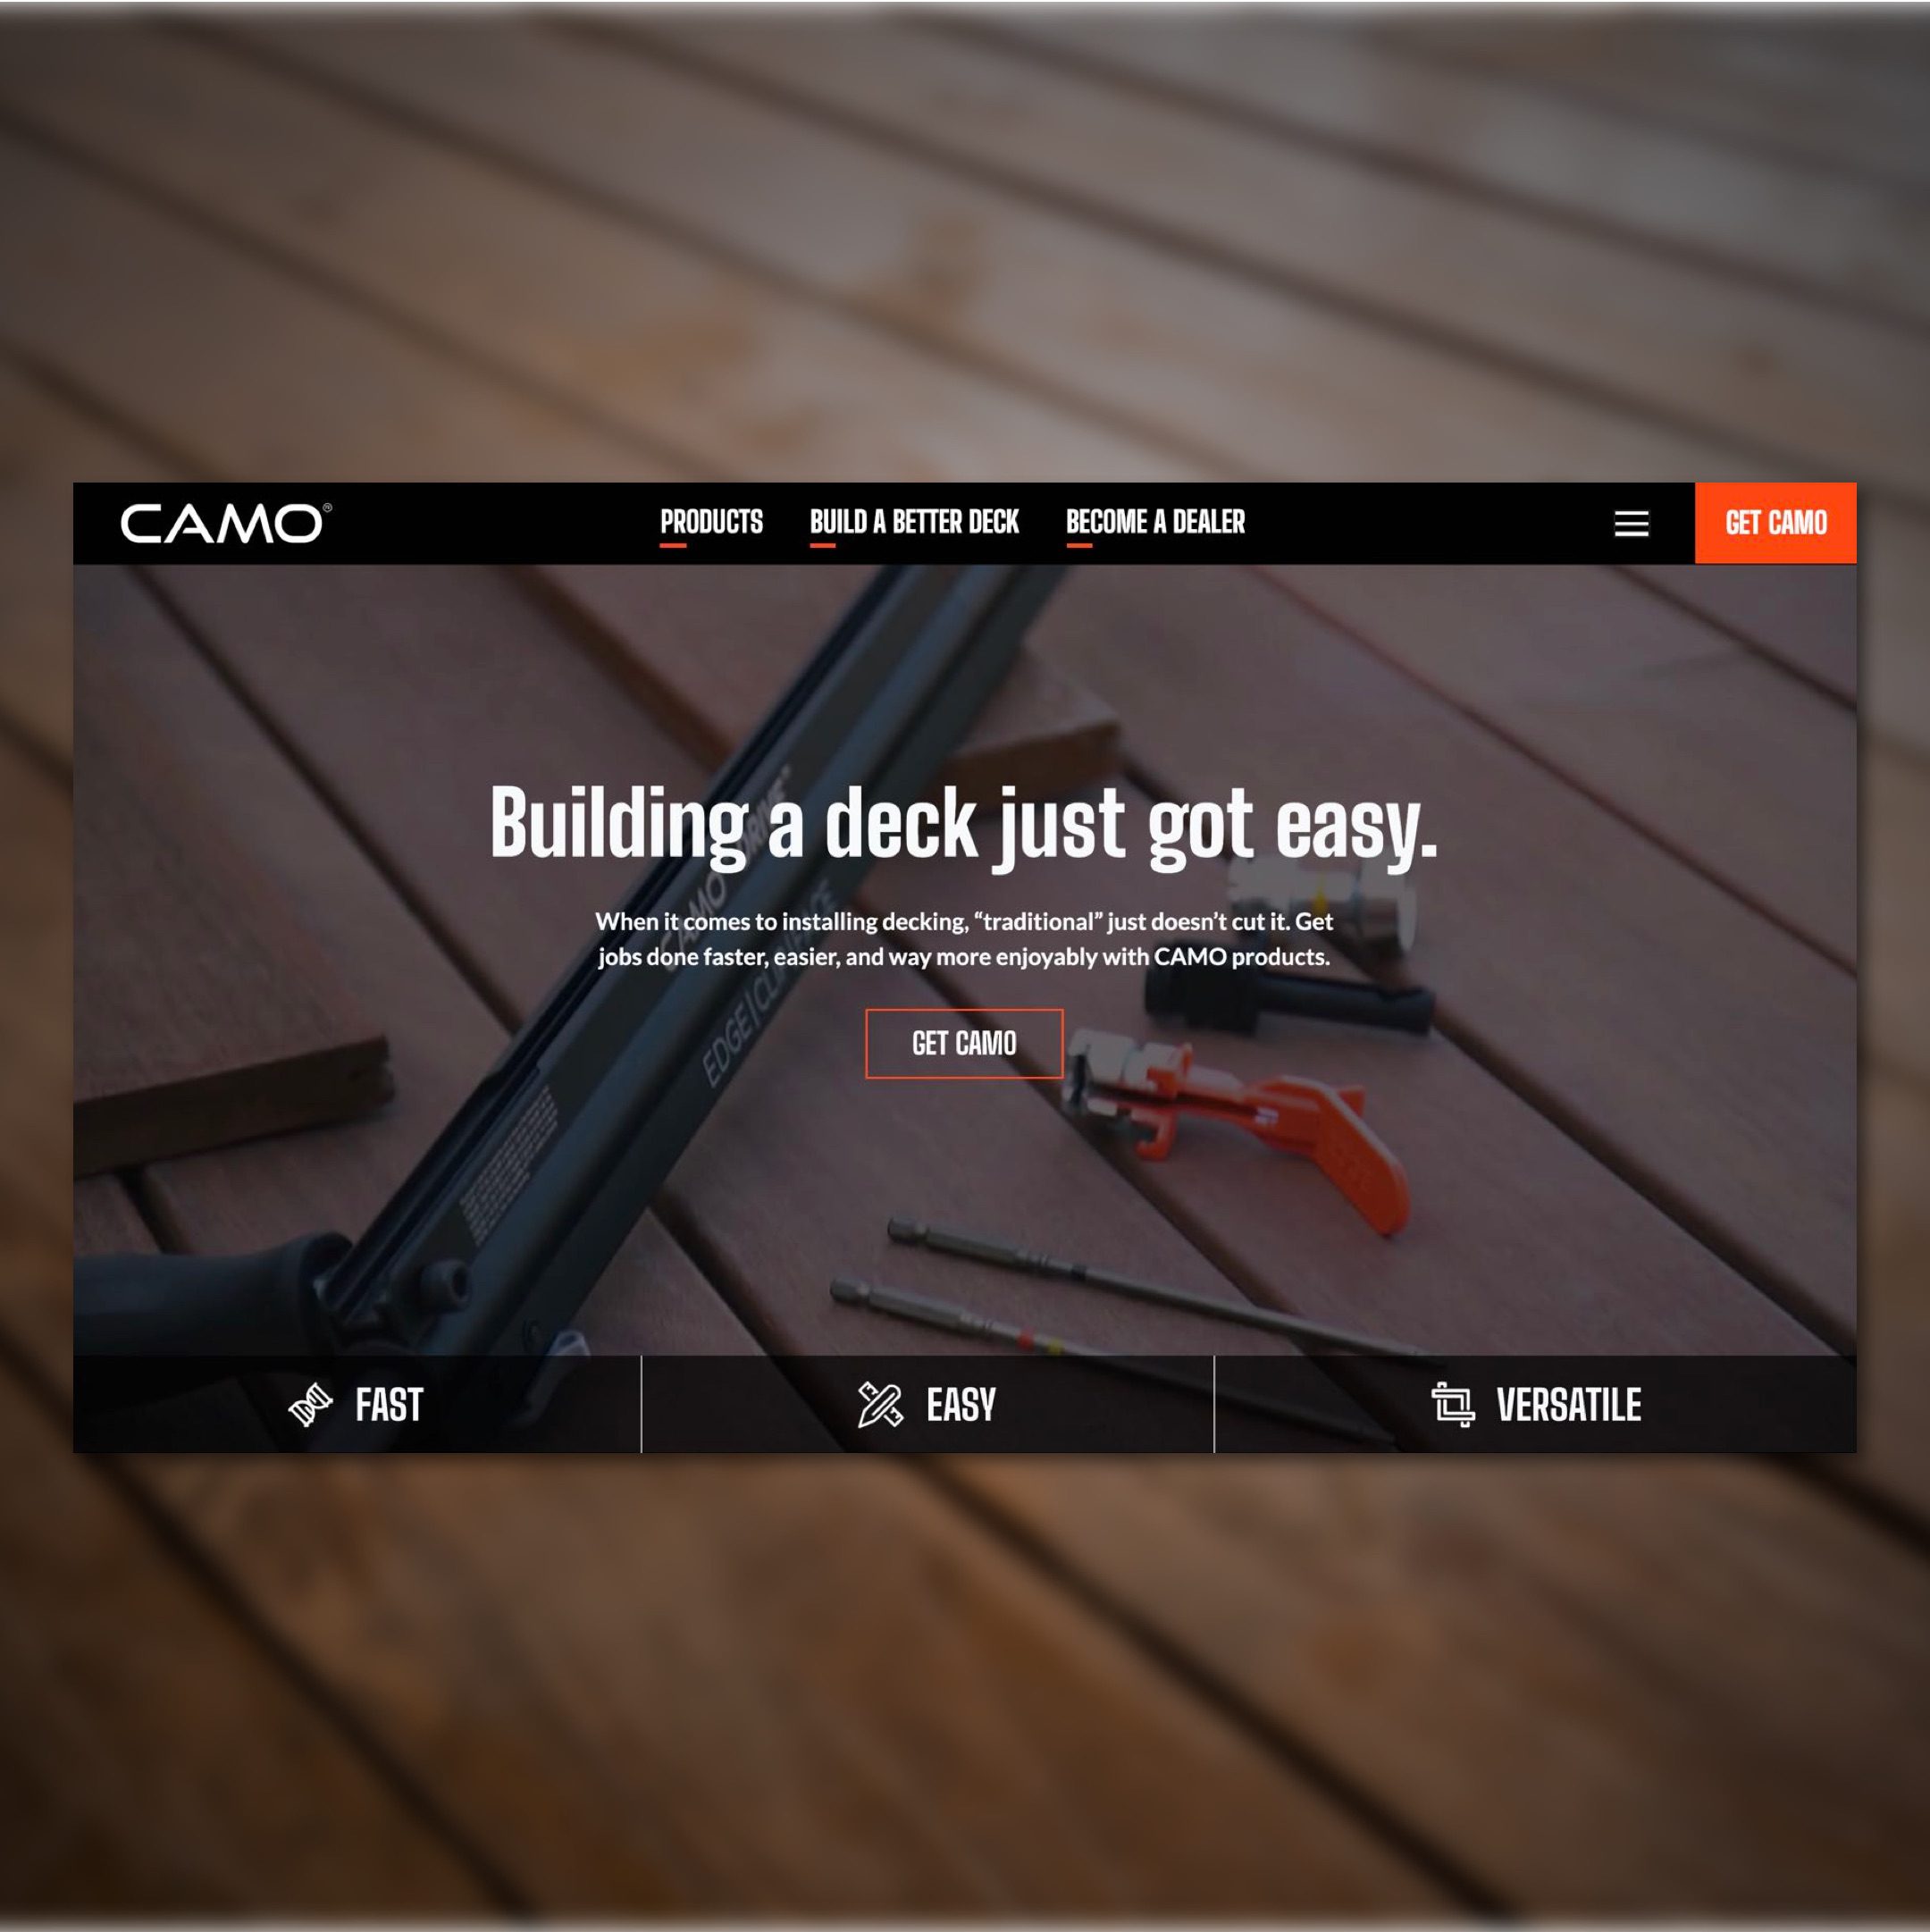 Image of CAMO homepage on top of blurry background texture of decking.